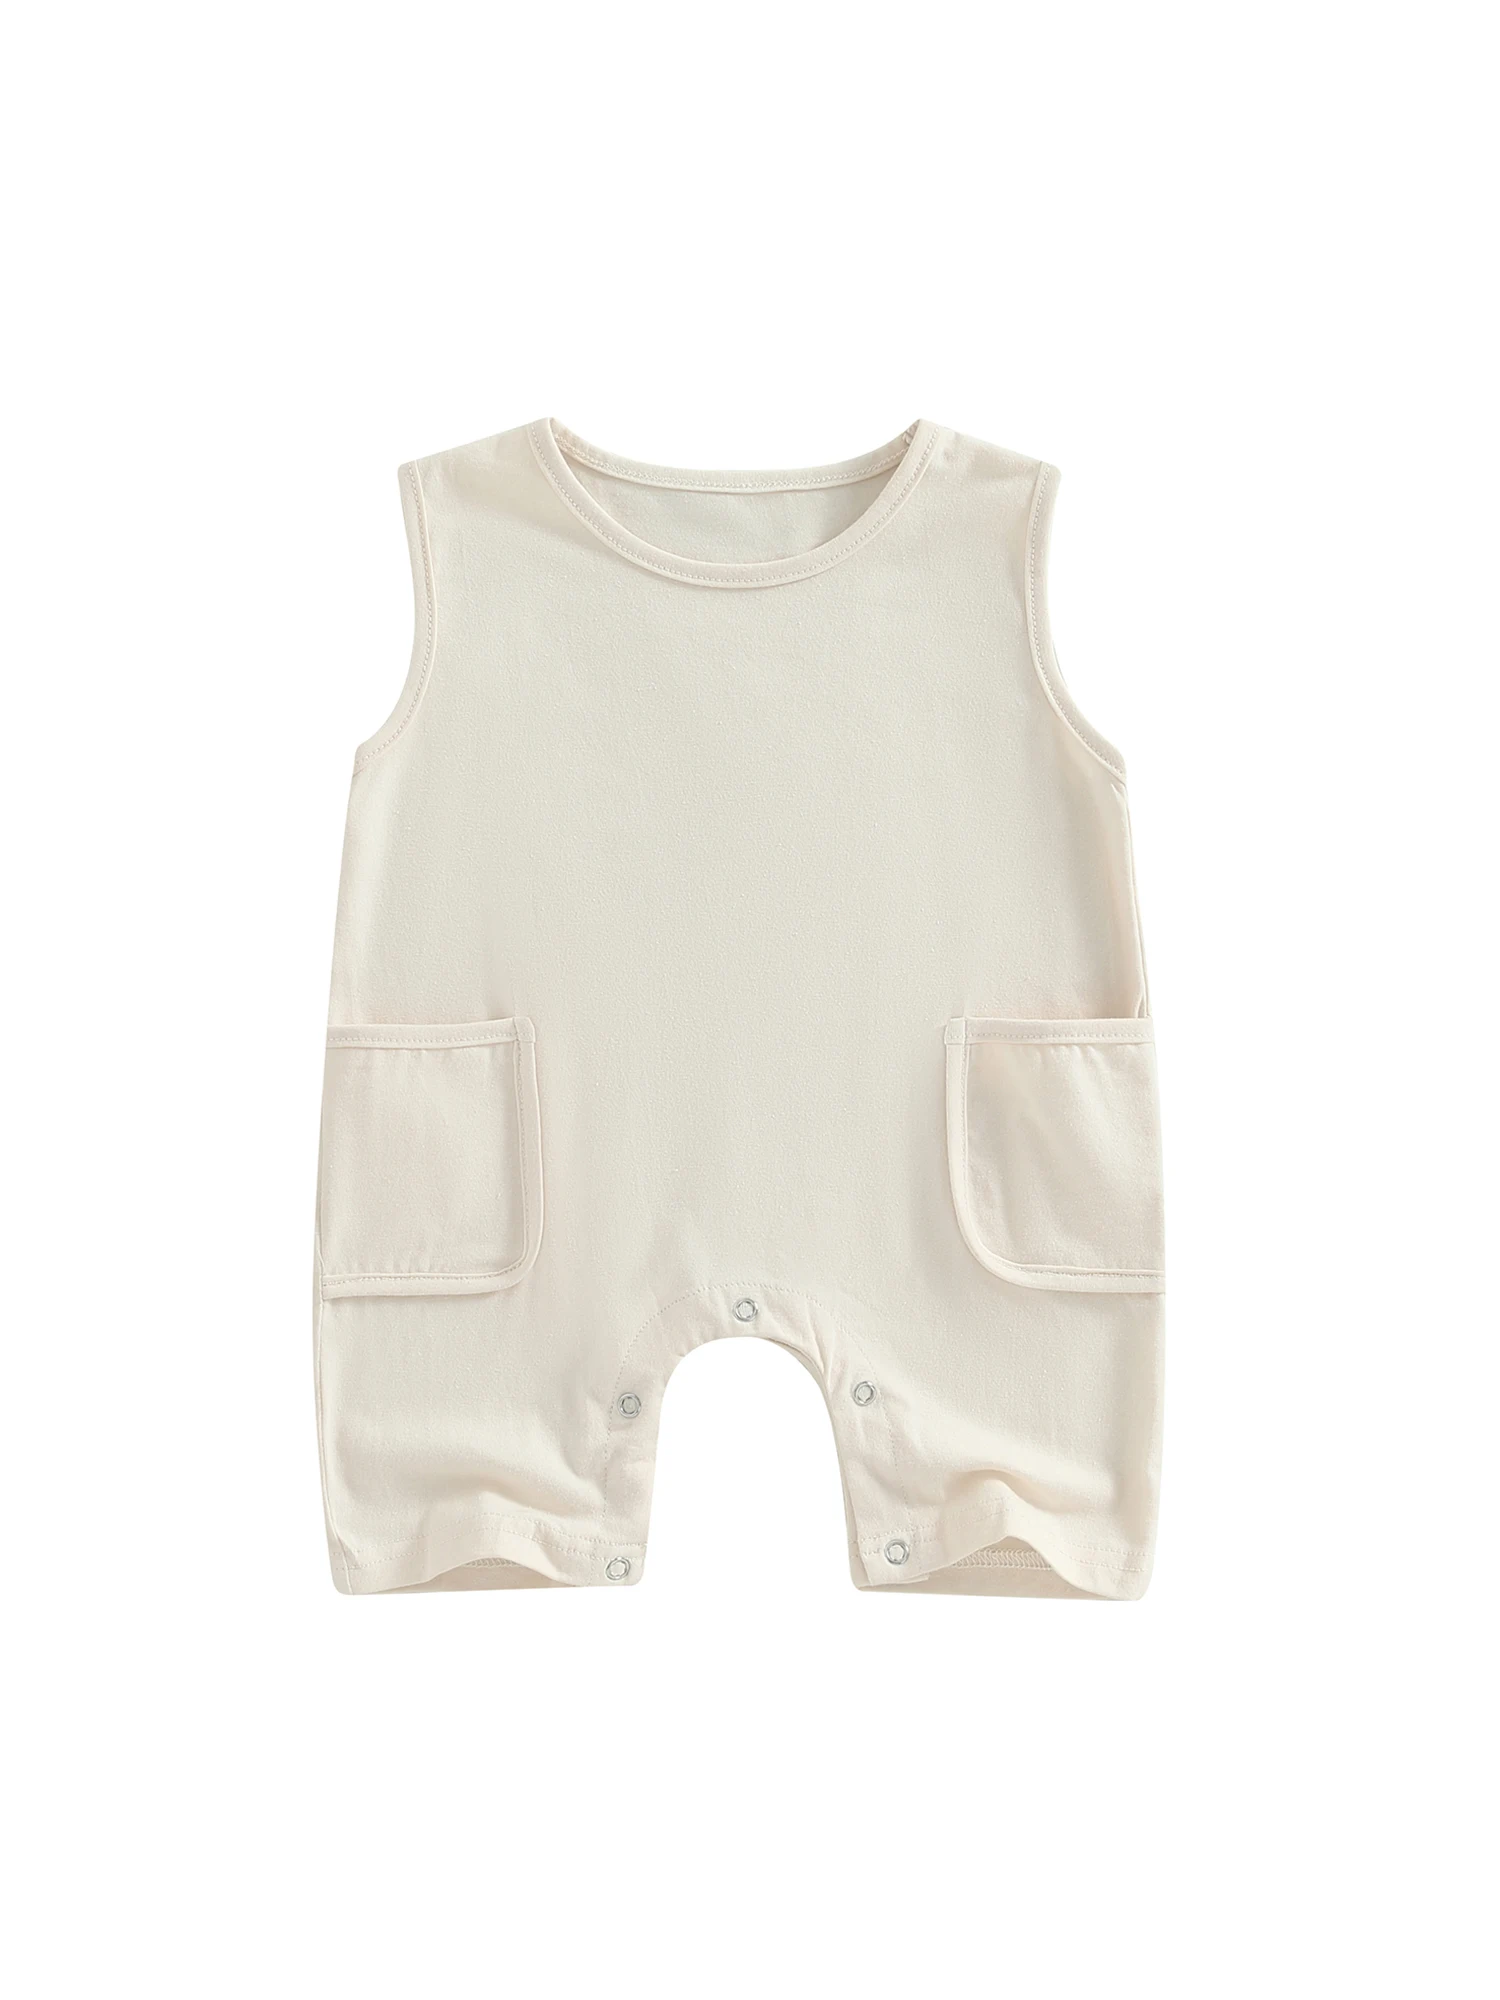 

Gender Neutral Newborn Baby Sleeveless Tank Basic Romper Jumpsuit Shorts Overalls Playsuit Cute Summer Outfit